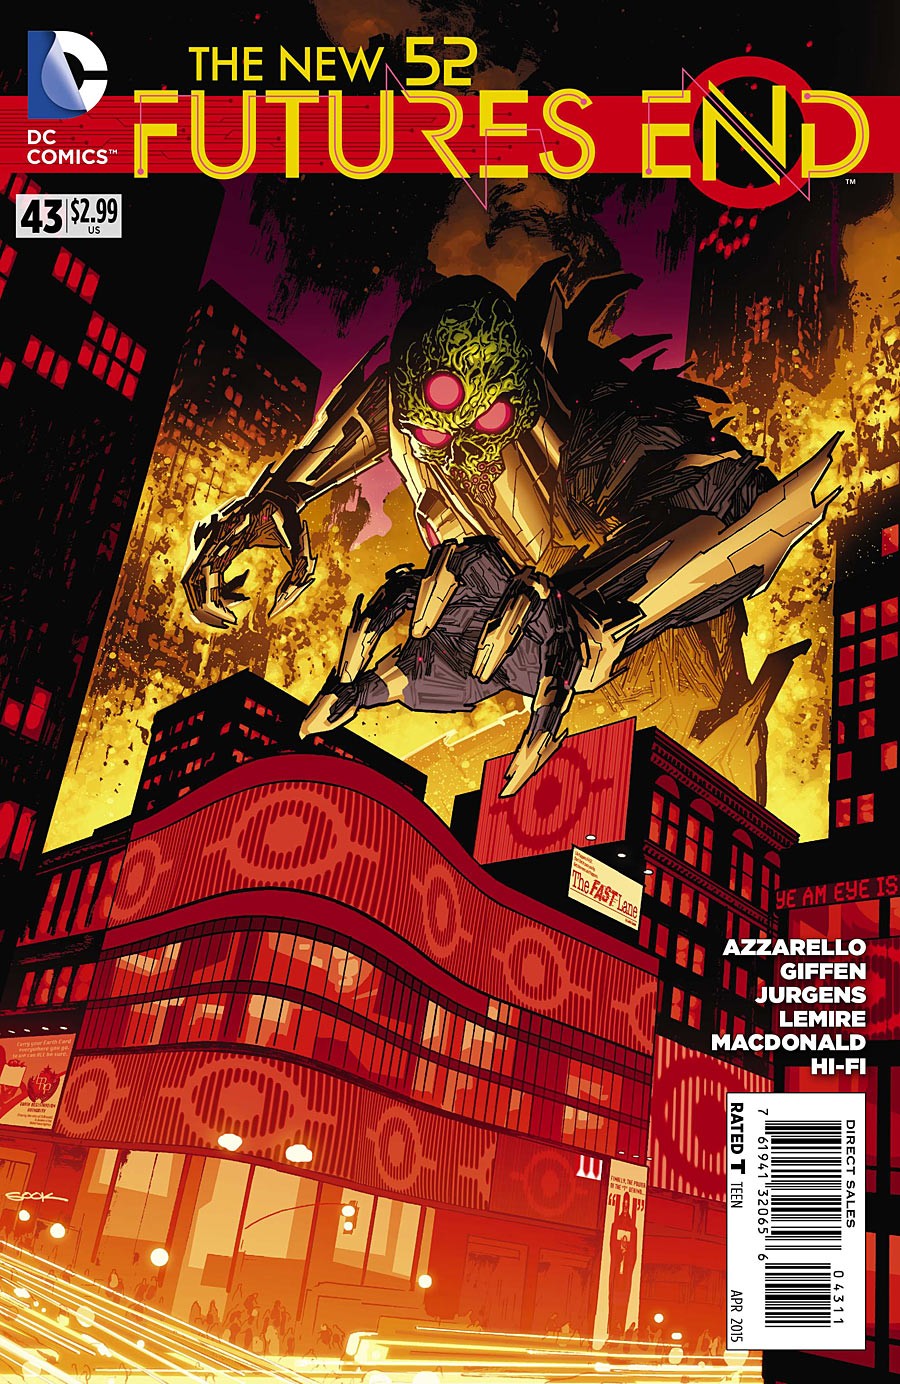 The New 52: Futures End Vol. 1 #43